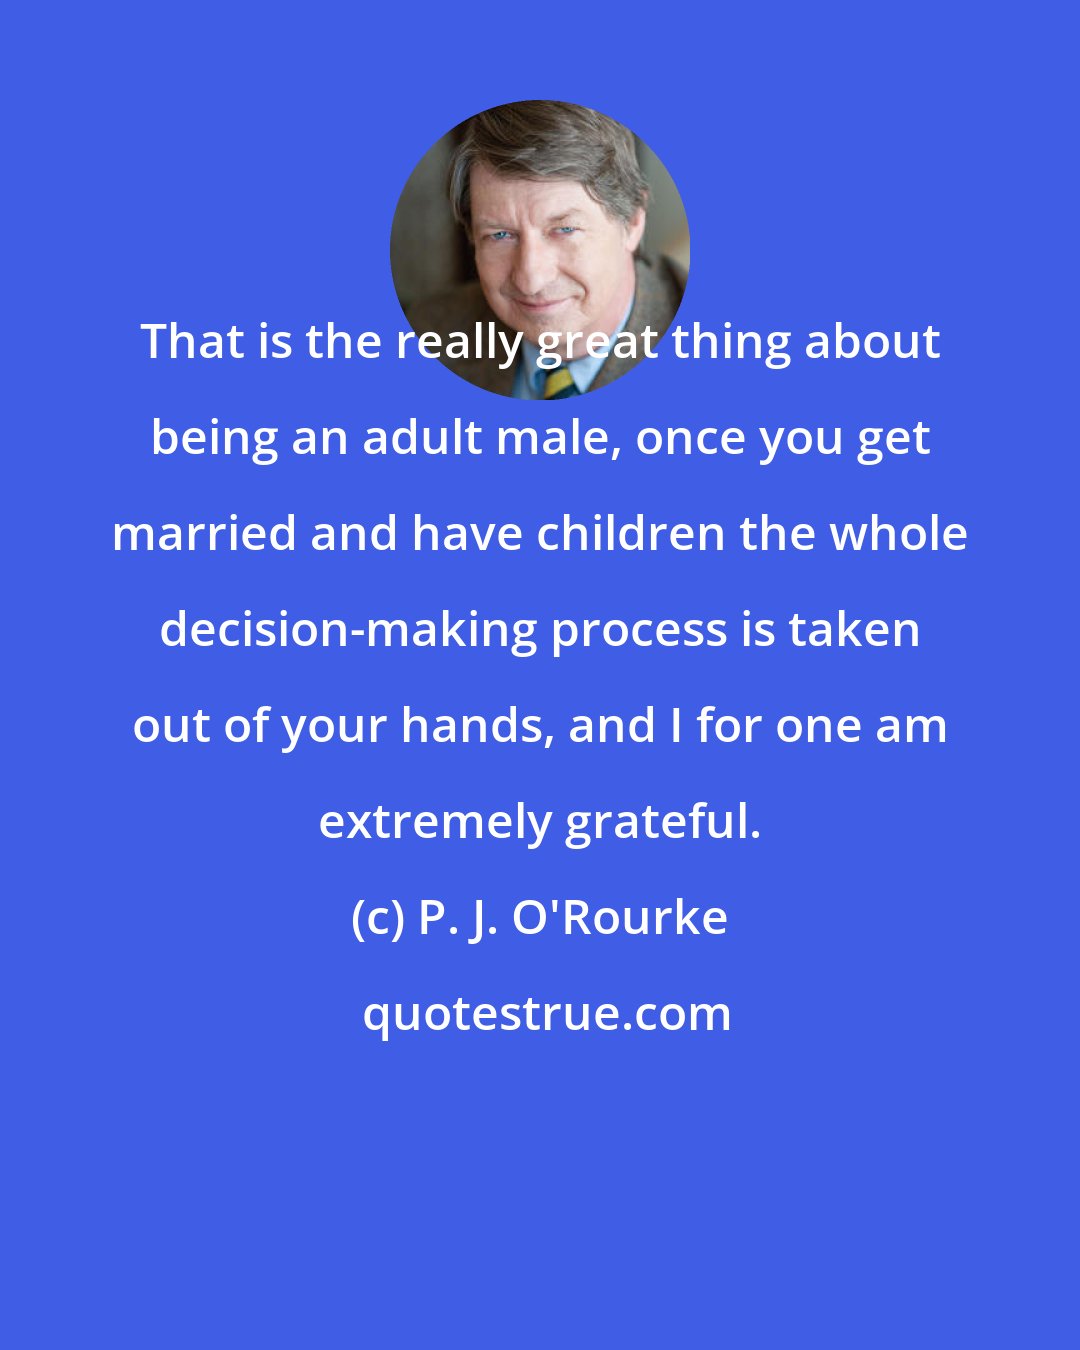 P. J. O'Rourke: That is the really great thing about being an adult male, once you get married and have children the whole decision-making process is taken out of your hands, and I for one am extremely grateful.